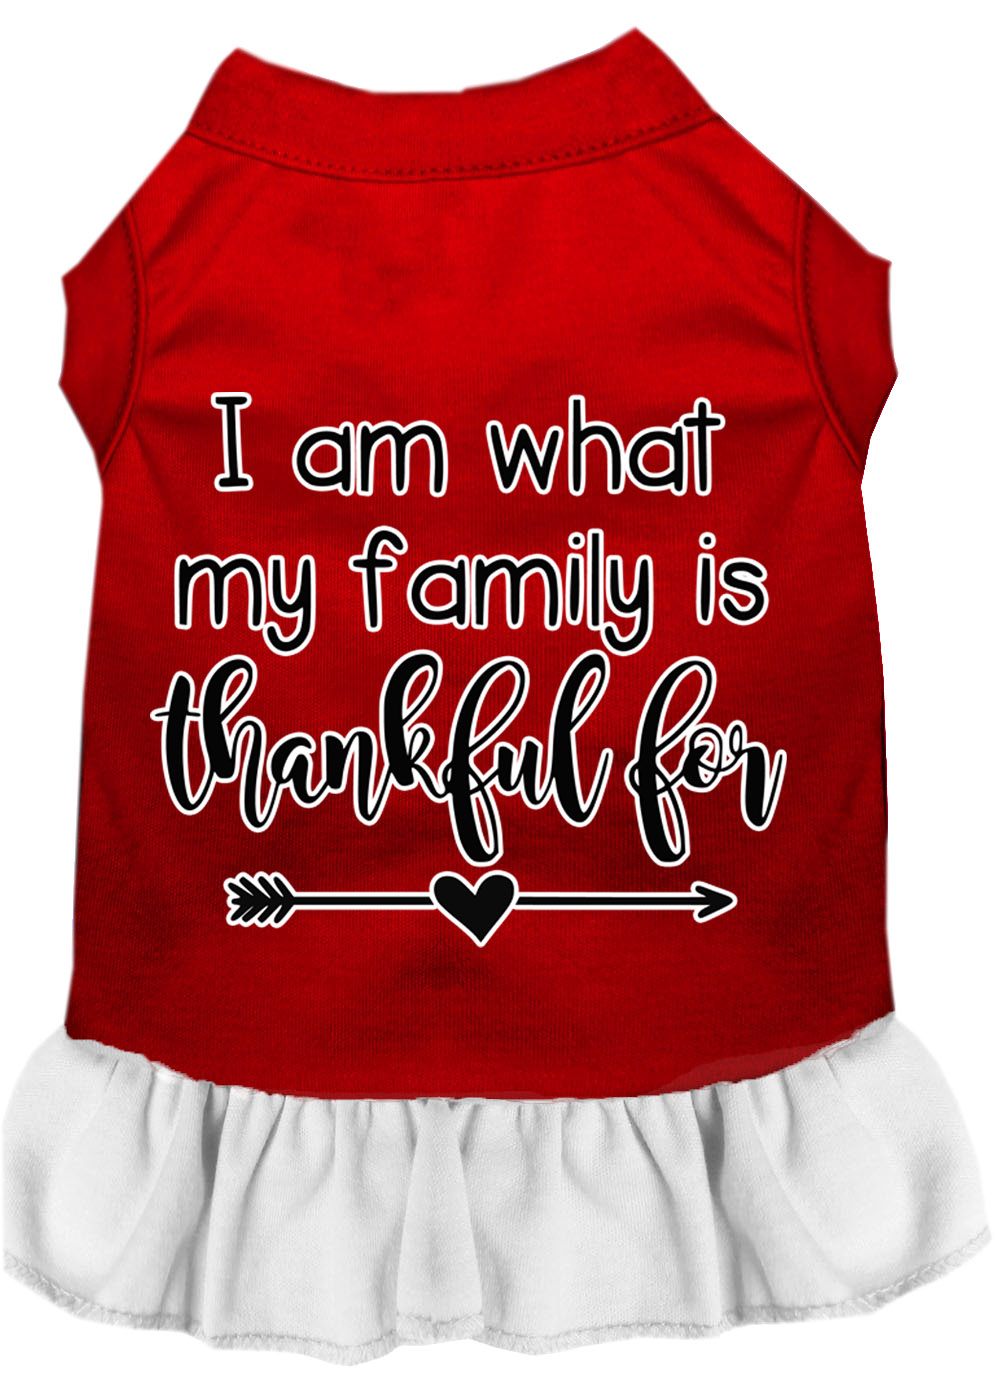 I Am What My Family is Thankful For Screen Print Dog Dress Red with White Sm